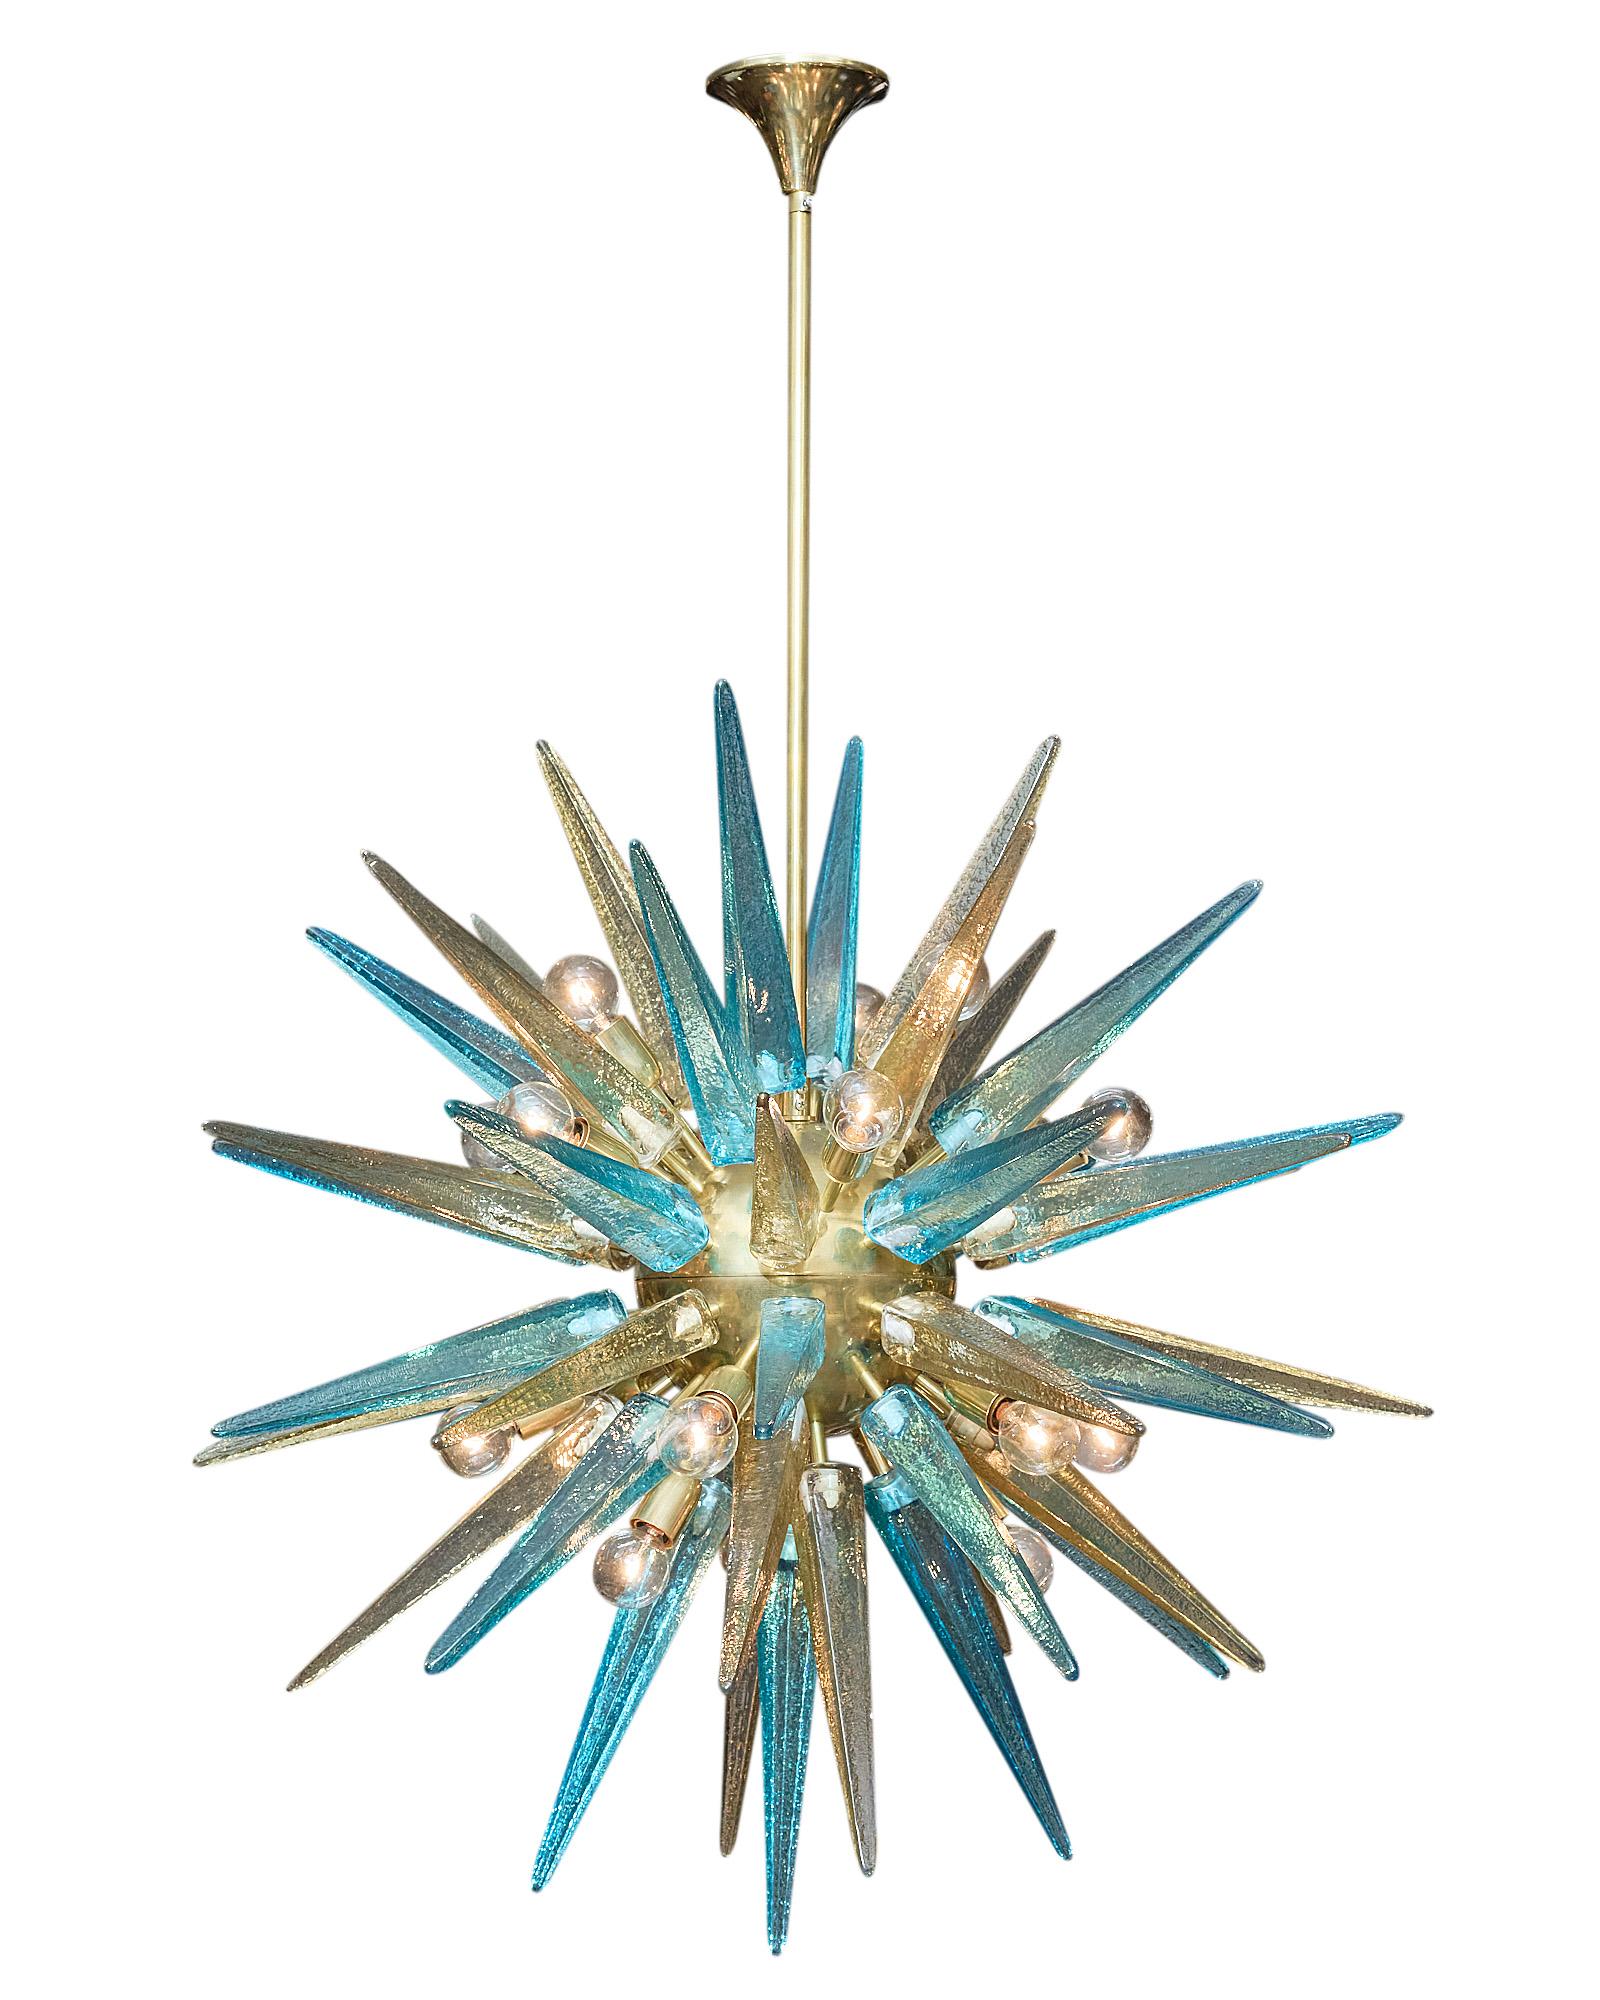 Italian Murano glass sputnik chandelier with prism elements. This fixture features hand-blown glass prisms in amber and aqua blue tones mounted on a gilt brass structure. This spectacular chandelier has a stunning decorative impact! It has been